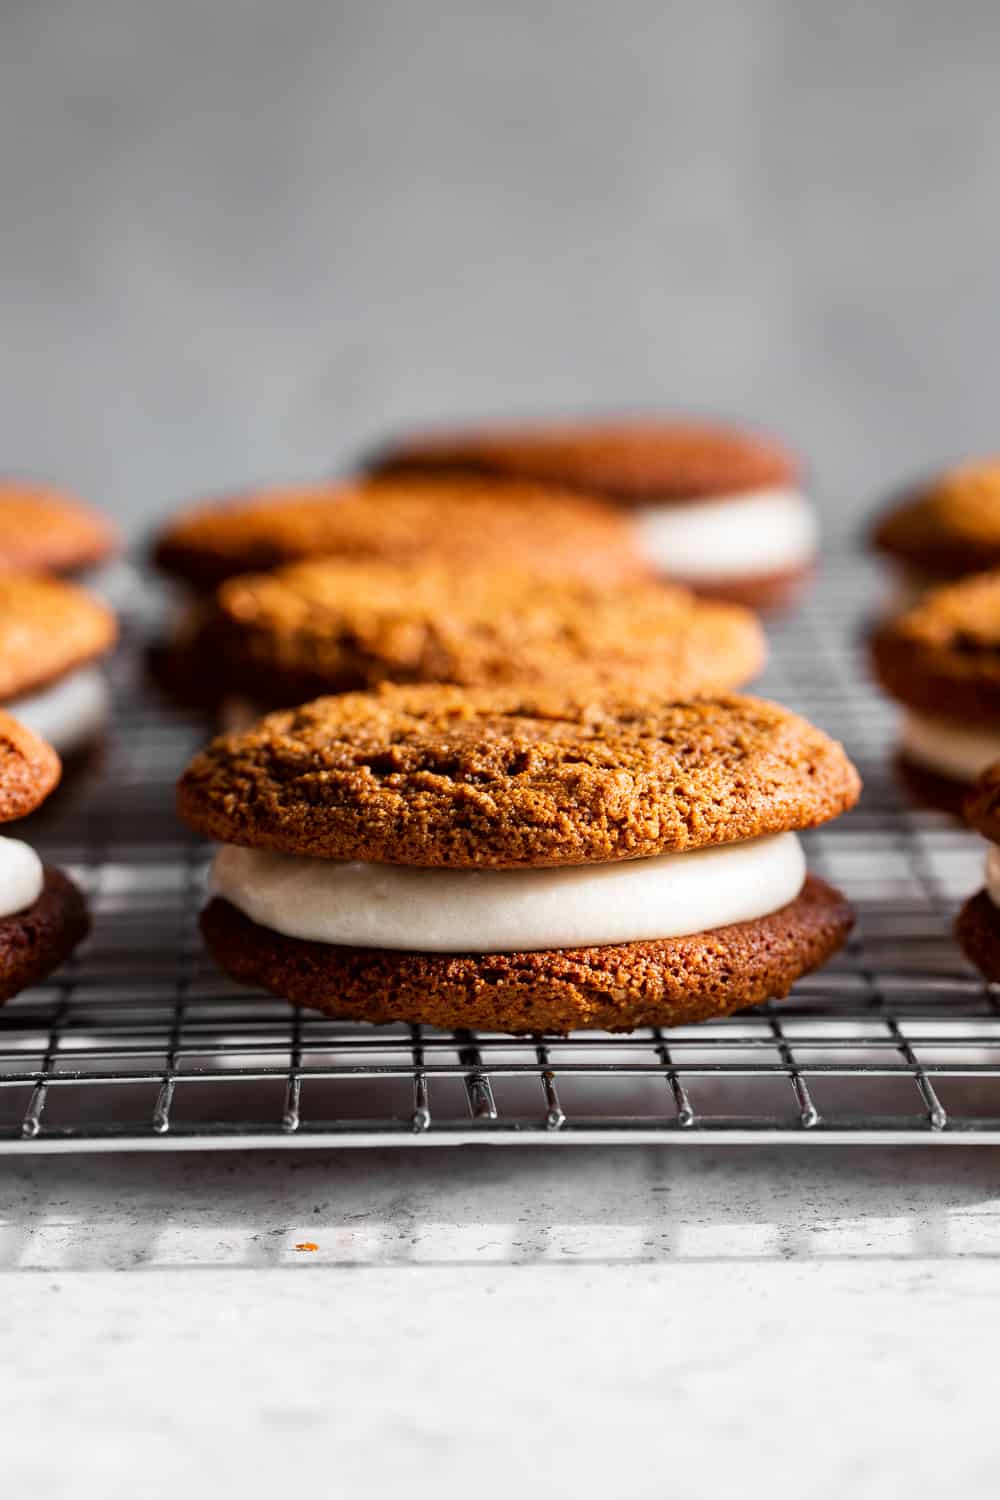 These grain free Gingerbread Whoopie Pies have loads of molasses flavor with warm spices and a soft cream cheese filling with a dairy free option. They’re gluten free, paleo friendly, easy to prepare and an extra special treat for the holiday season! #paleo #grainfree #paleobaking #glutenfree #glutenfreebaking